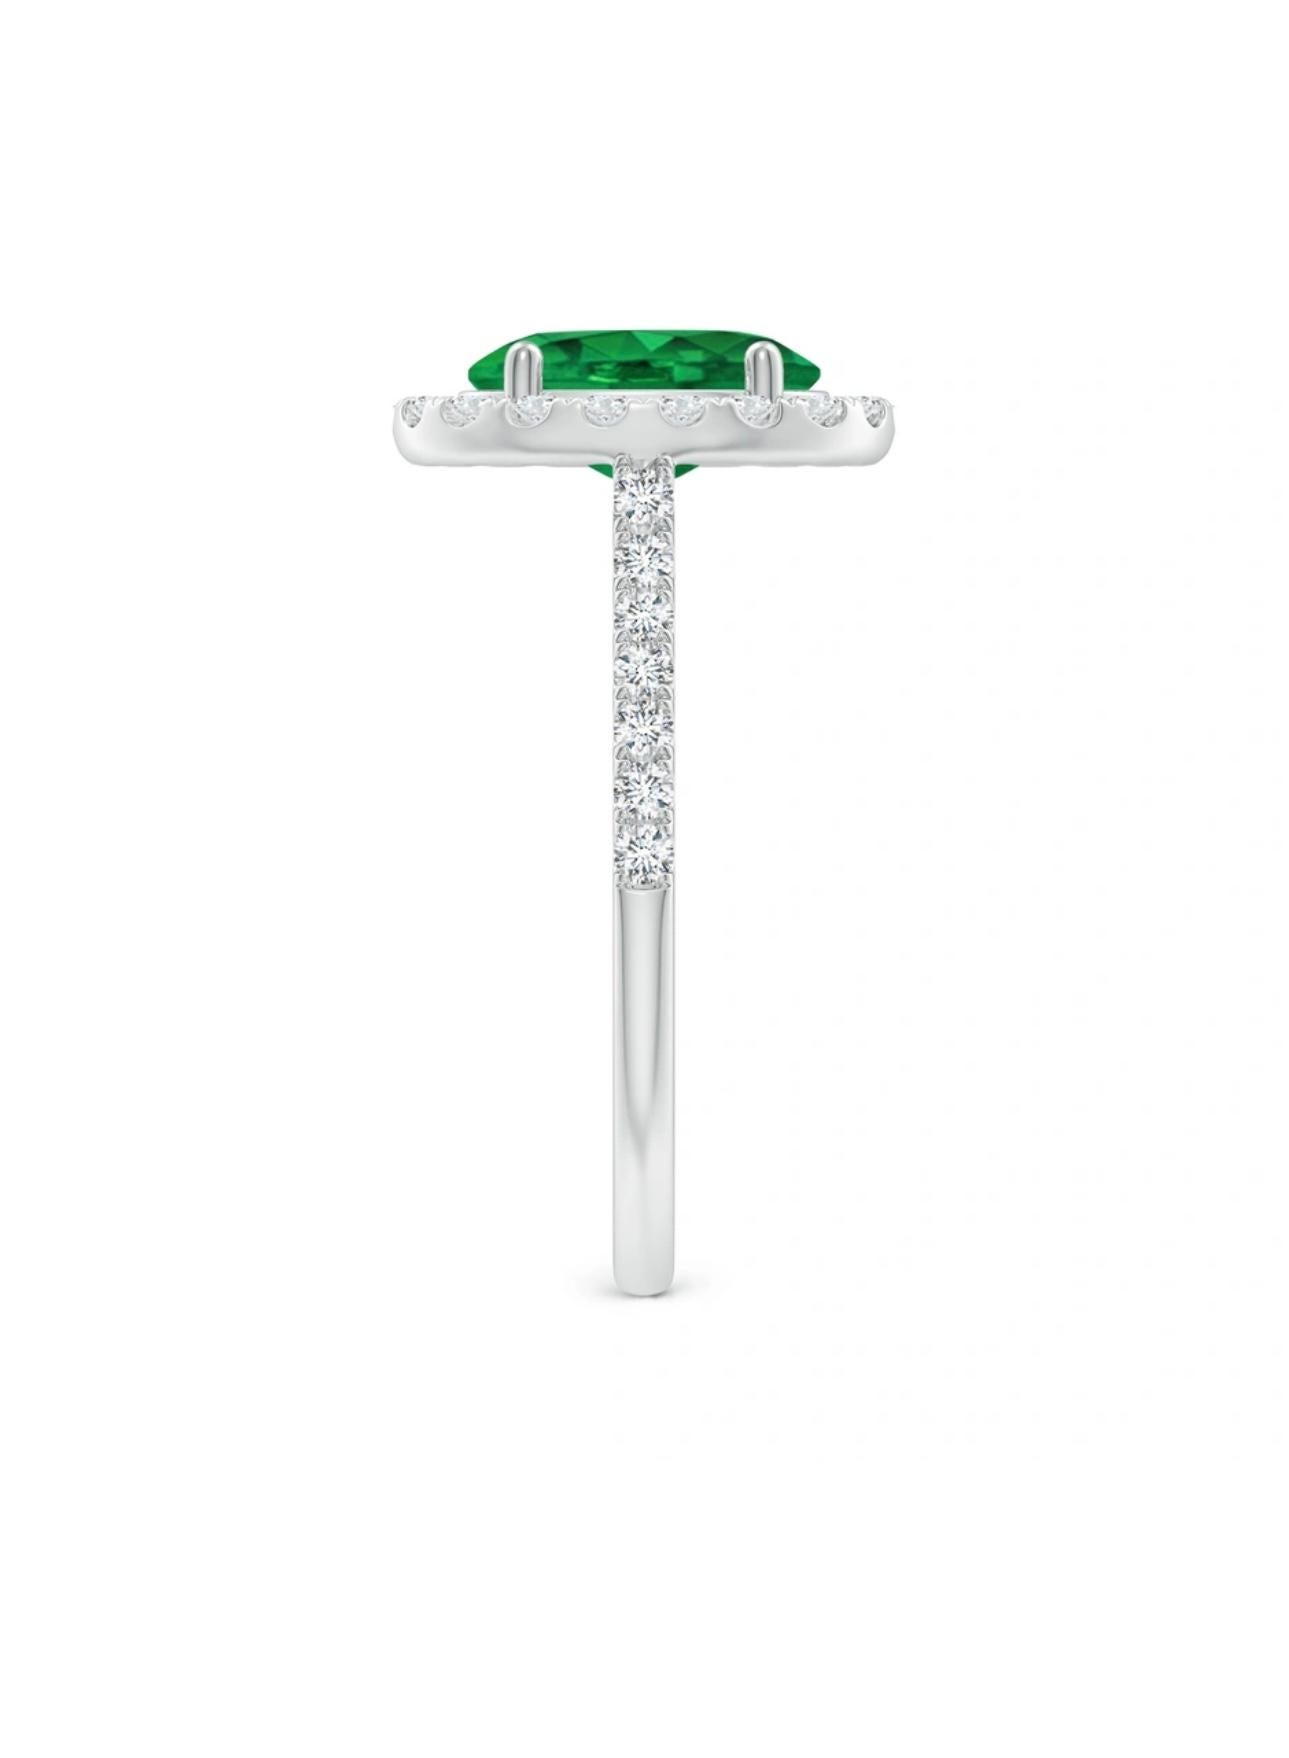 6x8mm Oval Cut Natural Emerald & 1 Ct Natural Diamond Halo Engagement Ring size 4.5 in 14 K white Gold
Introducing a truly stunning piece, behold the 1.25 Carat Oval Natural Zambian Emerald & 1 ct Diamond Ring in exquisite 14 Karat White Gold. This